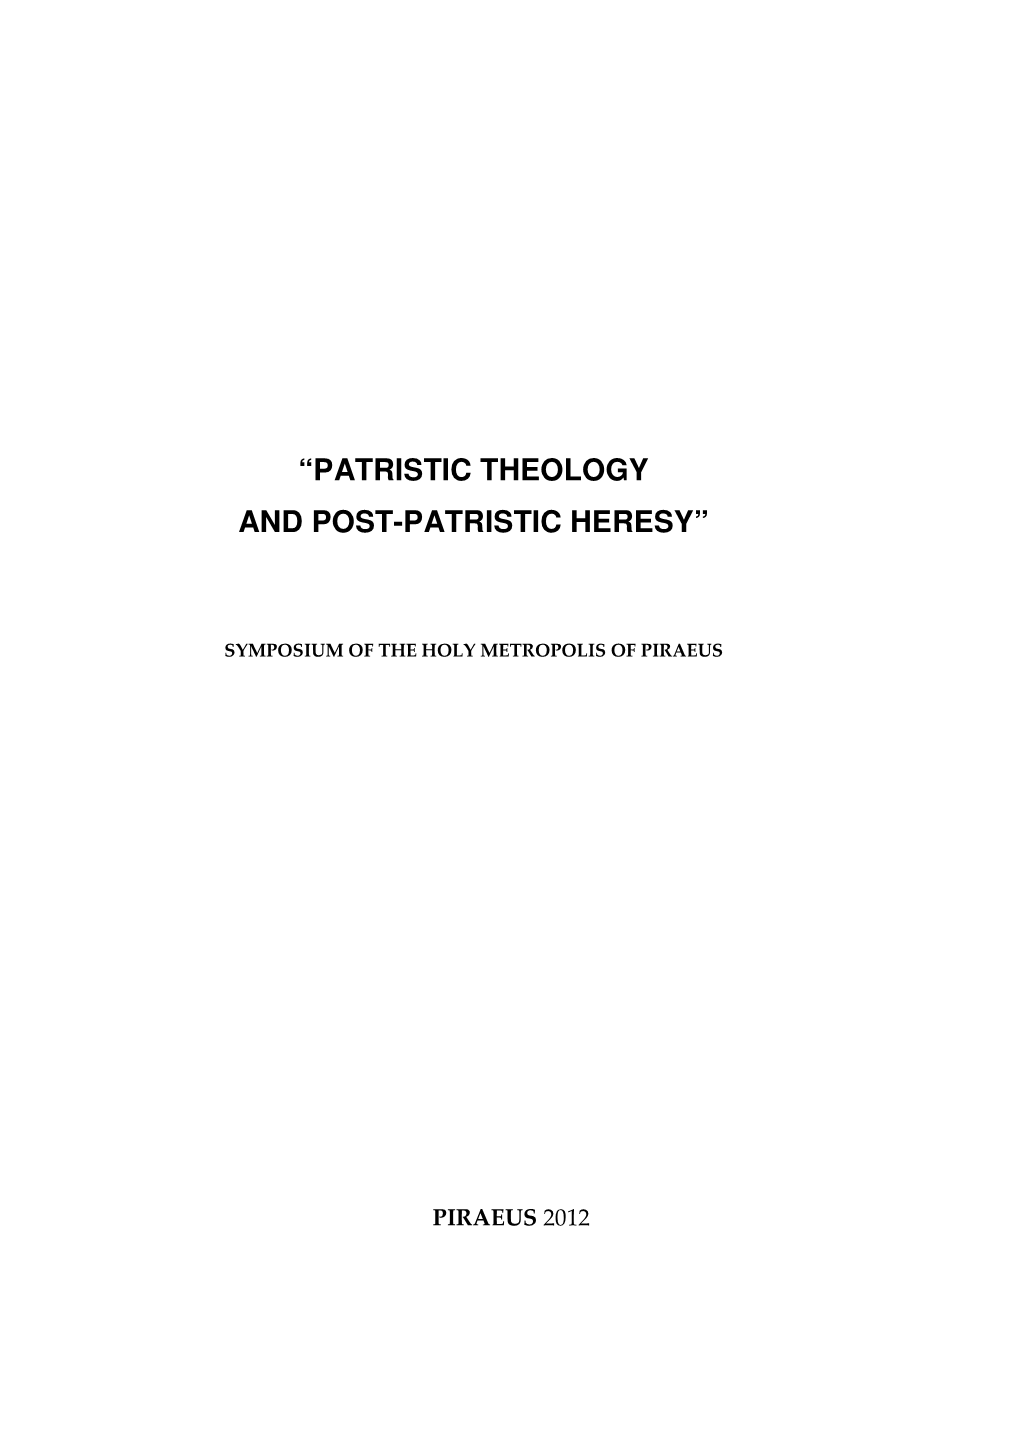 “Patristic Theology and Post-Patristic Heresy”